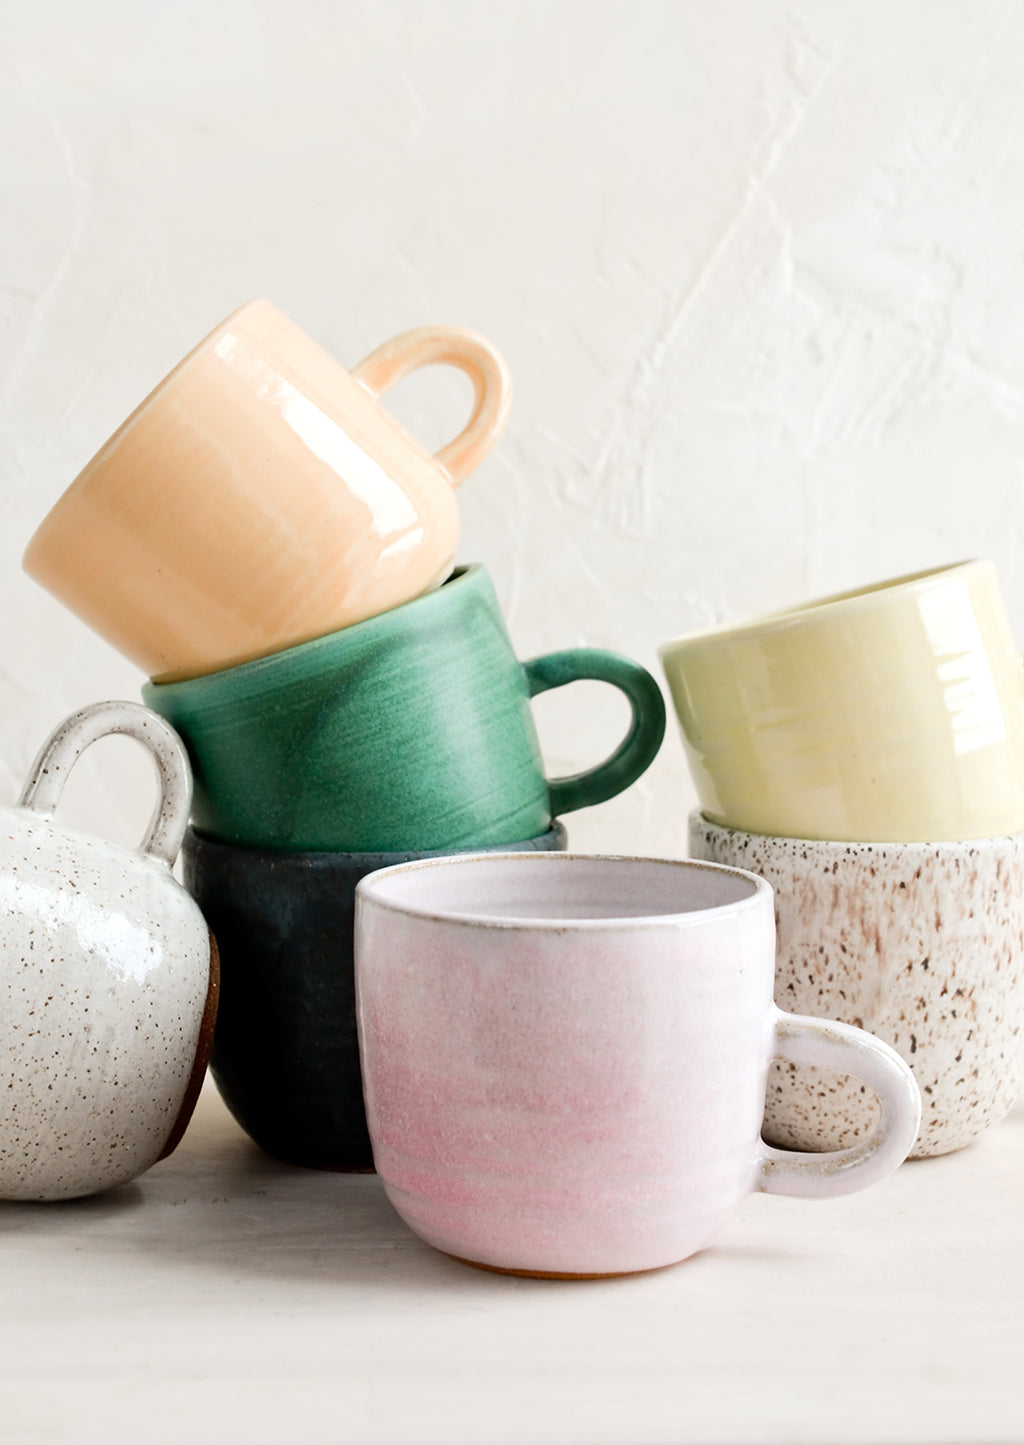 1: A stack of ceramic mugs in a mix of glazes and colors.